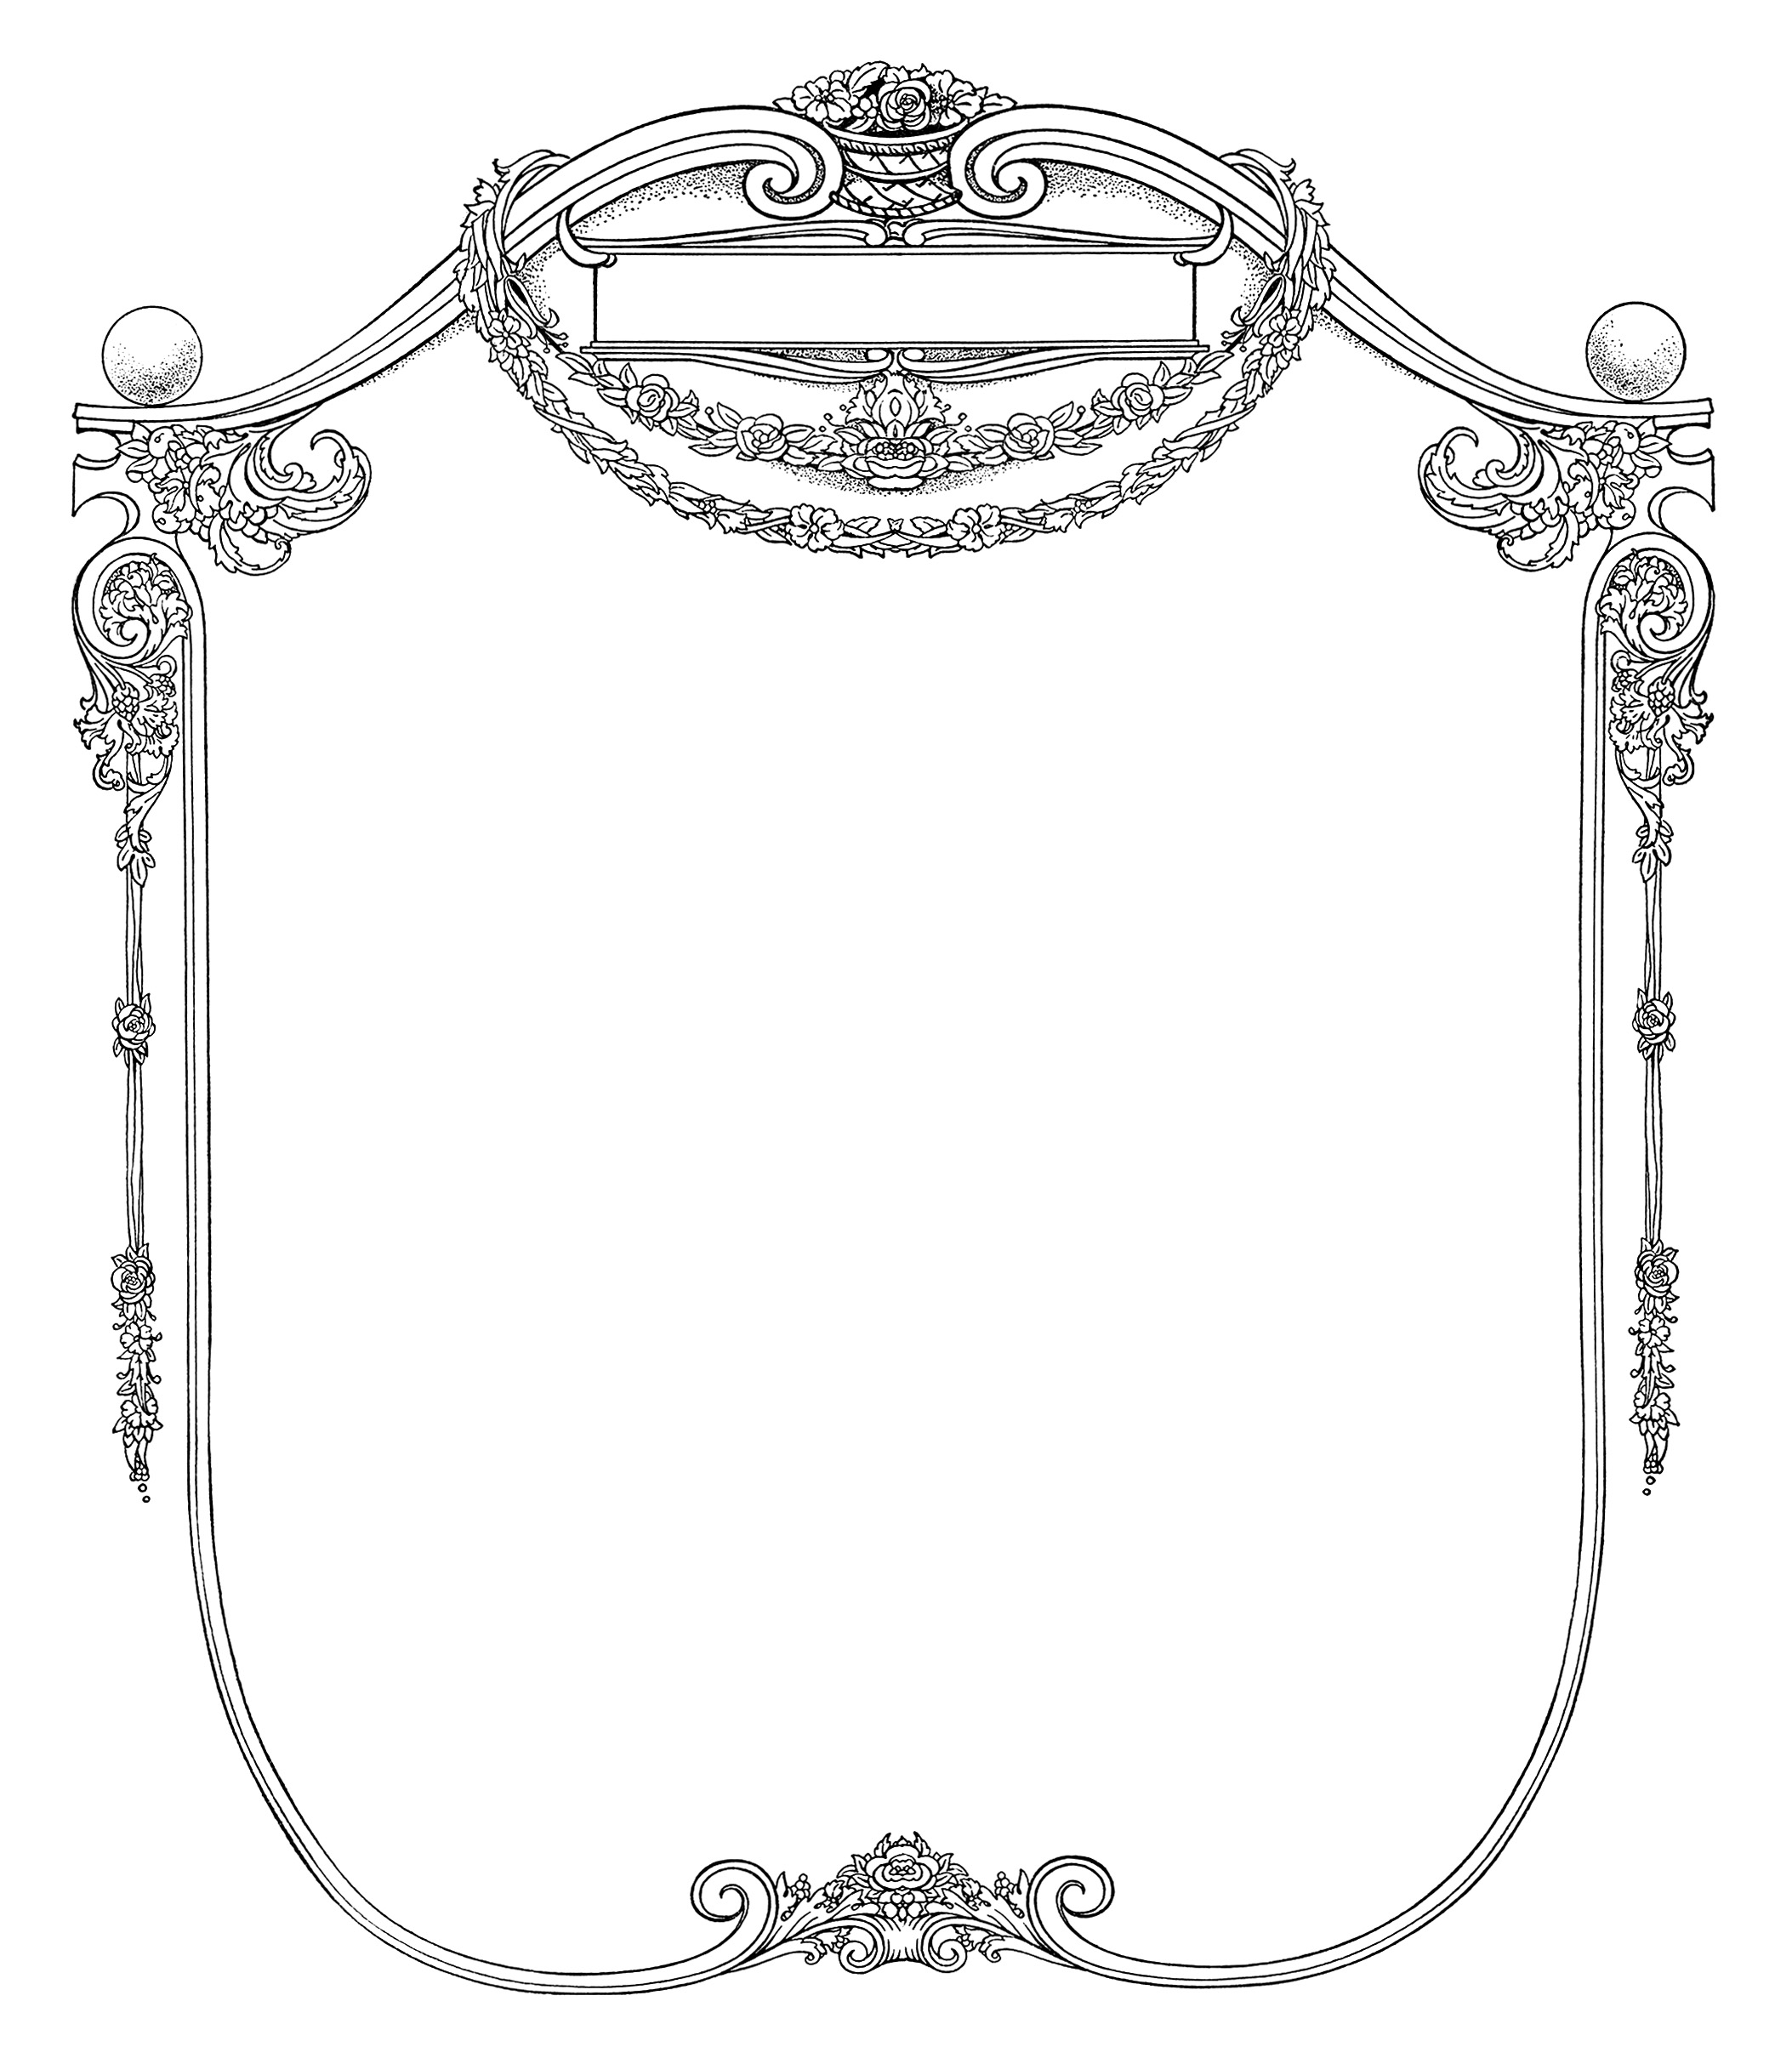 free clip art frames to download - photo #20